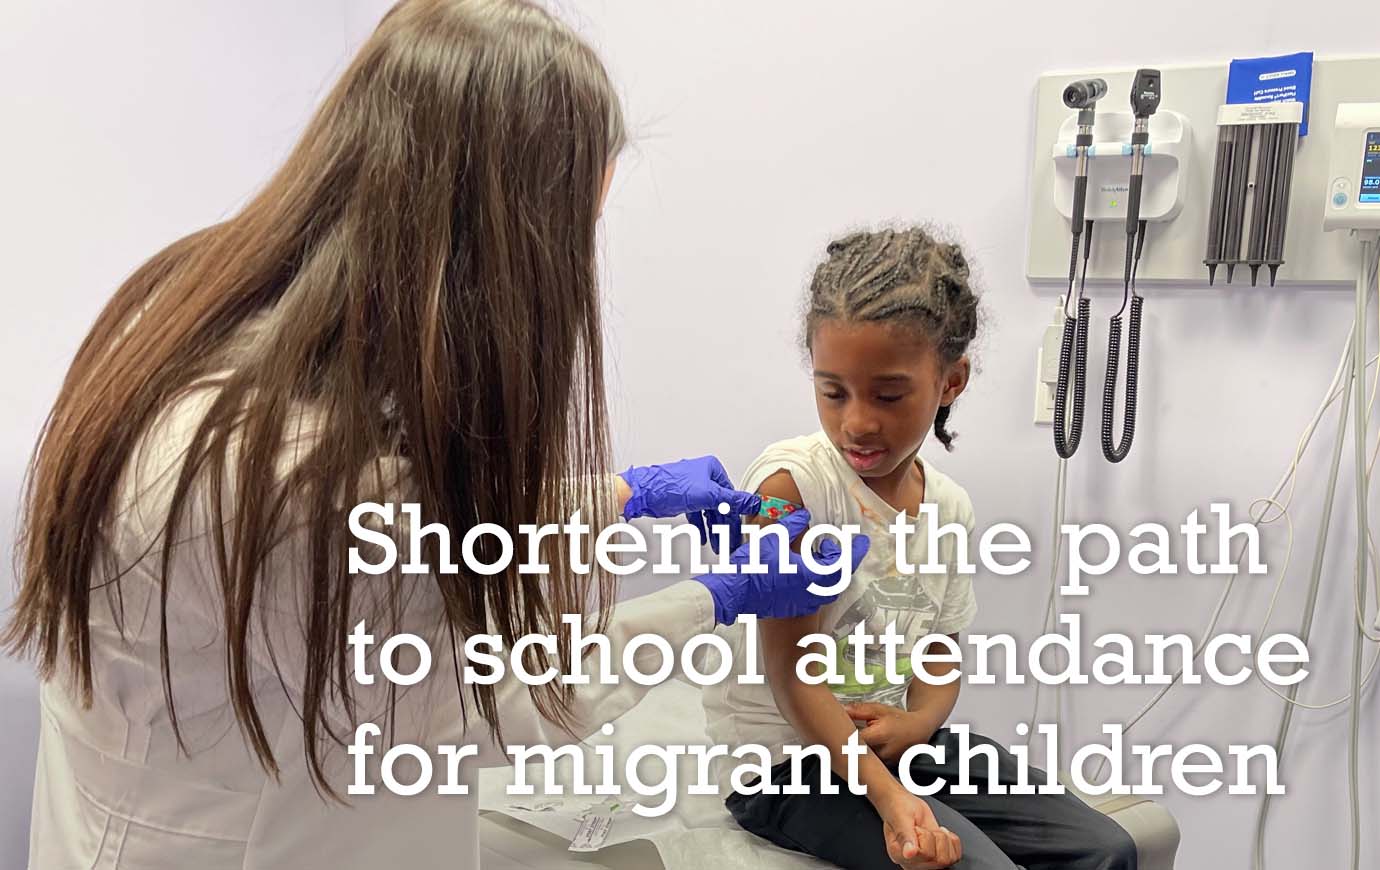 Shortening the path to school attendance for migrant children